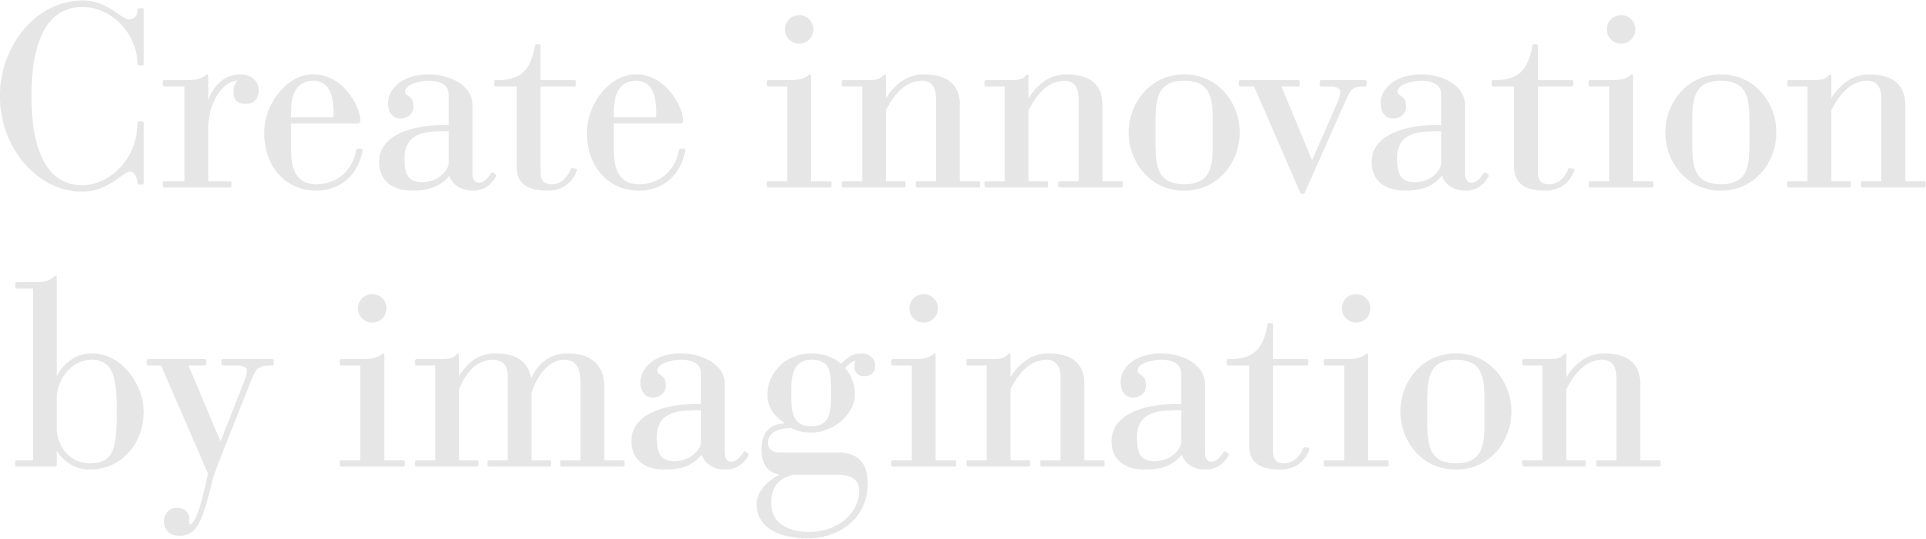 Creative innovation by imagination